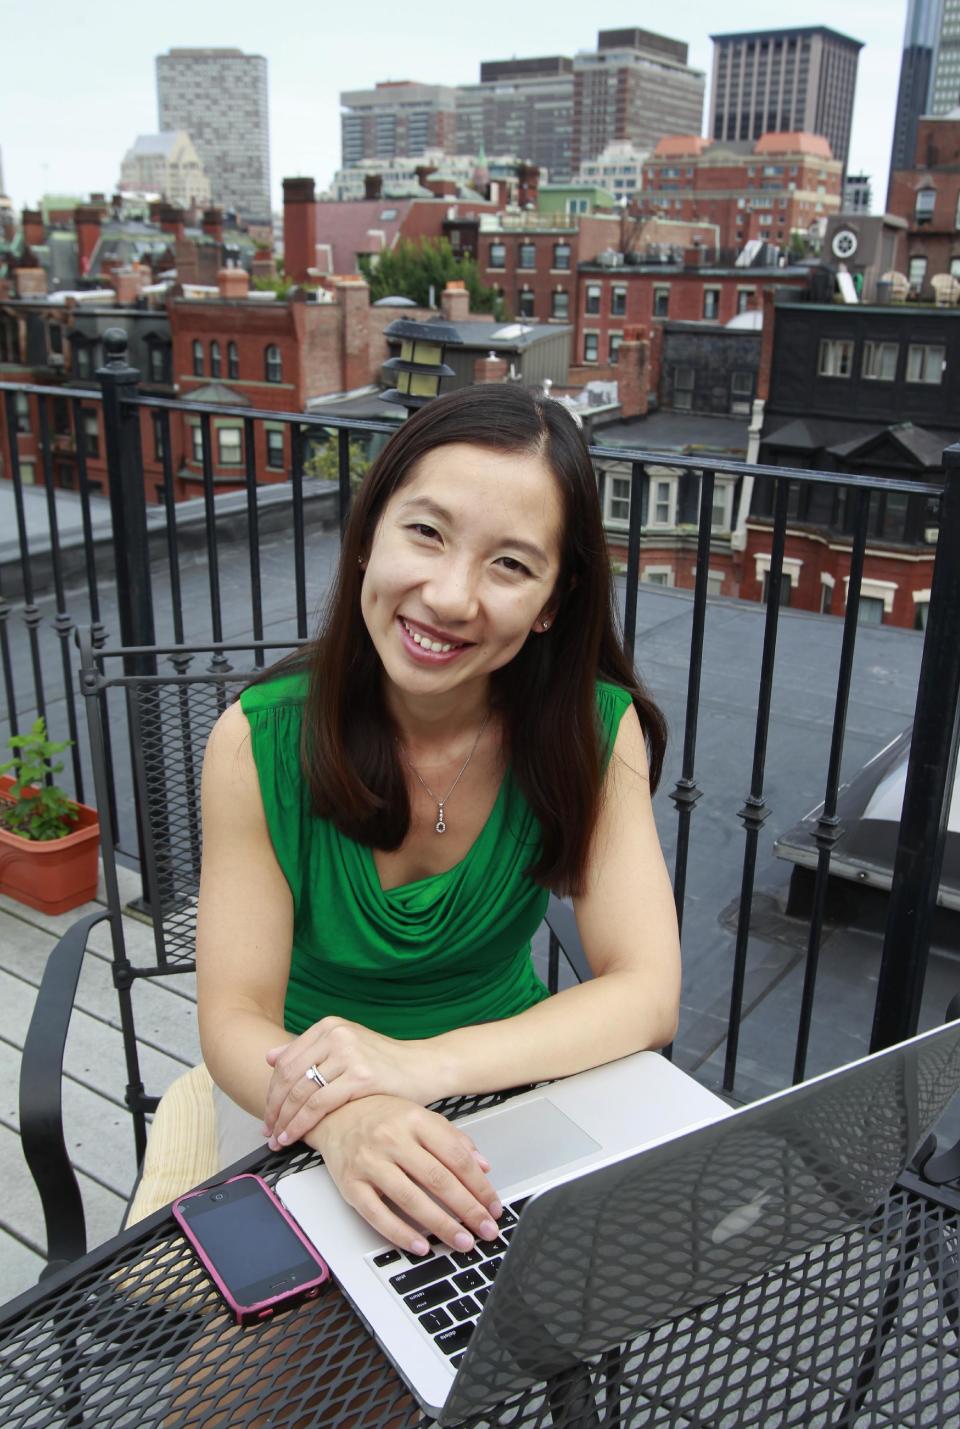 In this Tuesday, Aug. 14, 2012 photo Leana Wen, who is doing her medical residency in emergency medicine at Harvard-affiliated Brigham and Women's Hospital and Massachusetts General Hospital, sits in front of her computer on the rooftop of her apartment in Boston. Wen chose emergency medicine because the hours are more flexible than those of primary care physicians. (AP Photo/Steven Senne)